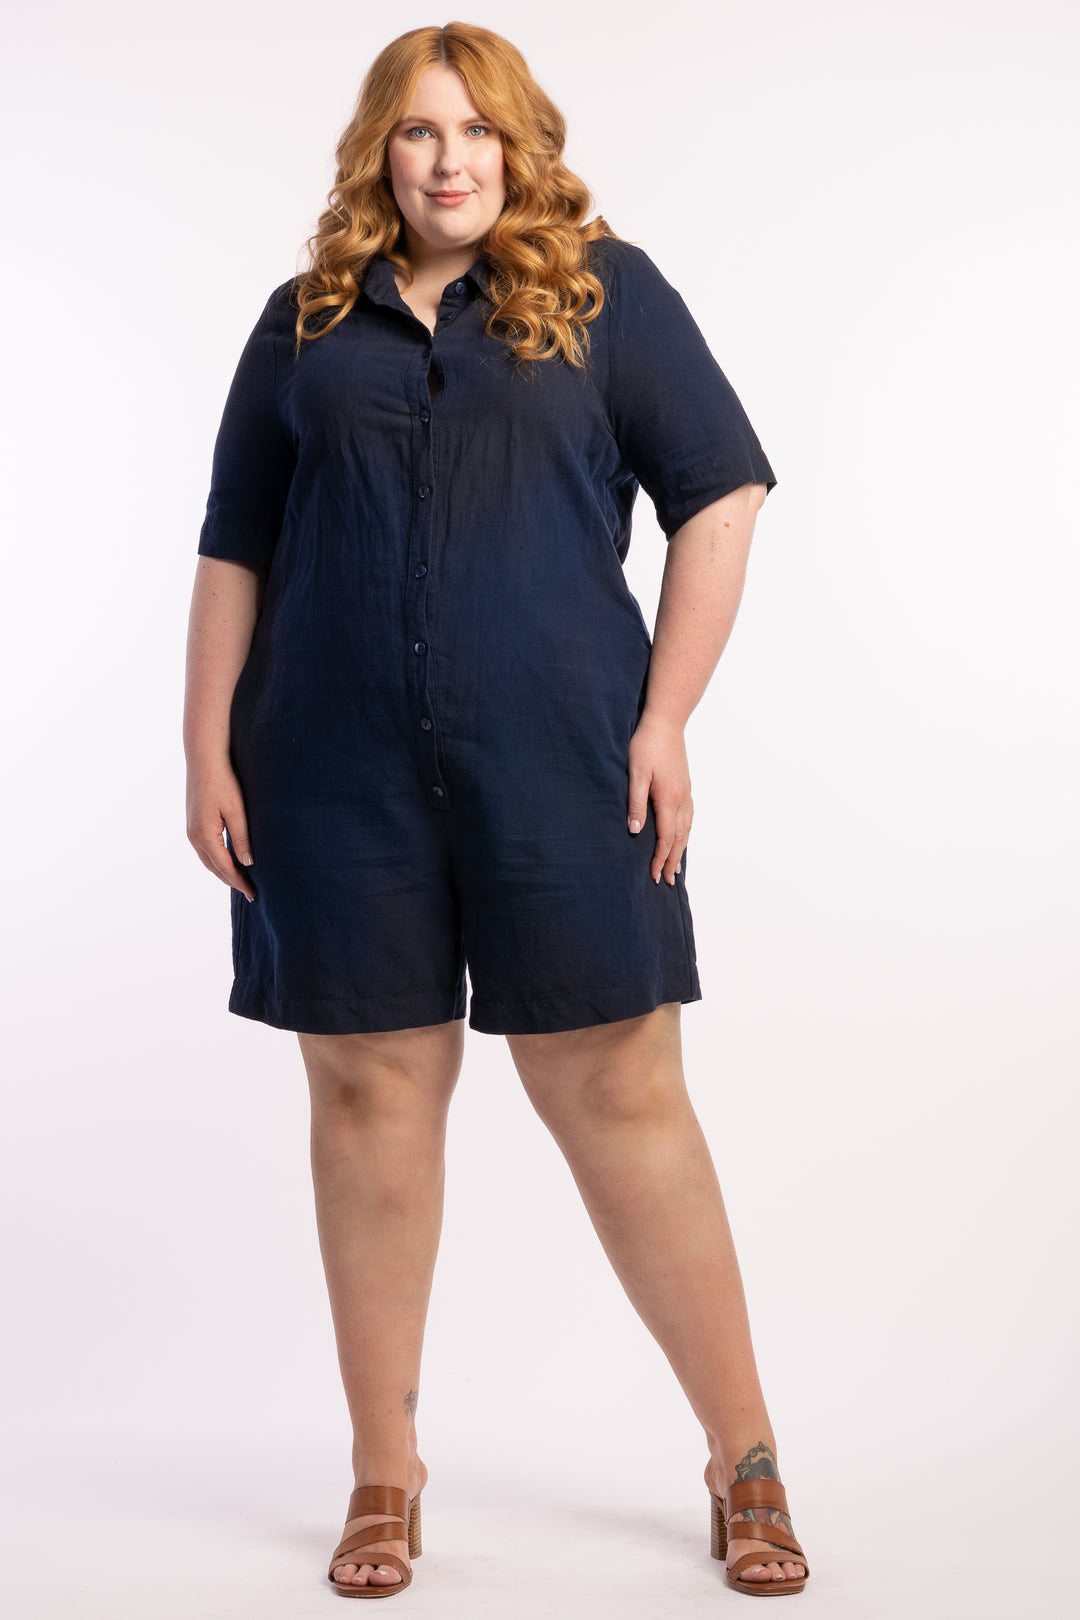 Jump For My Love Jumpsuit - Navy -  STOCK AVAILABLE - SIZE S (14/16)